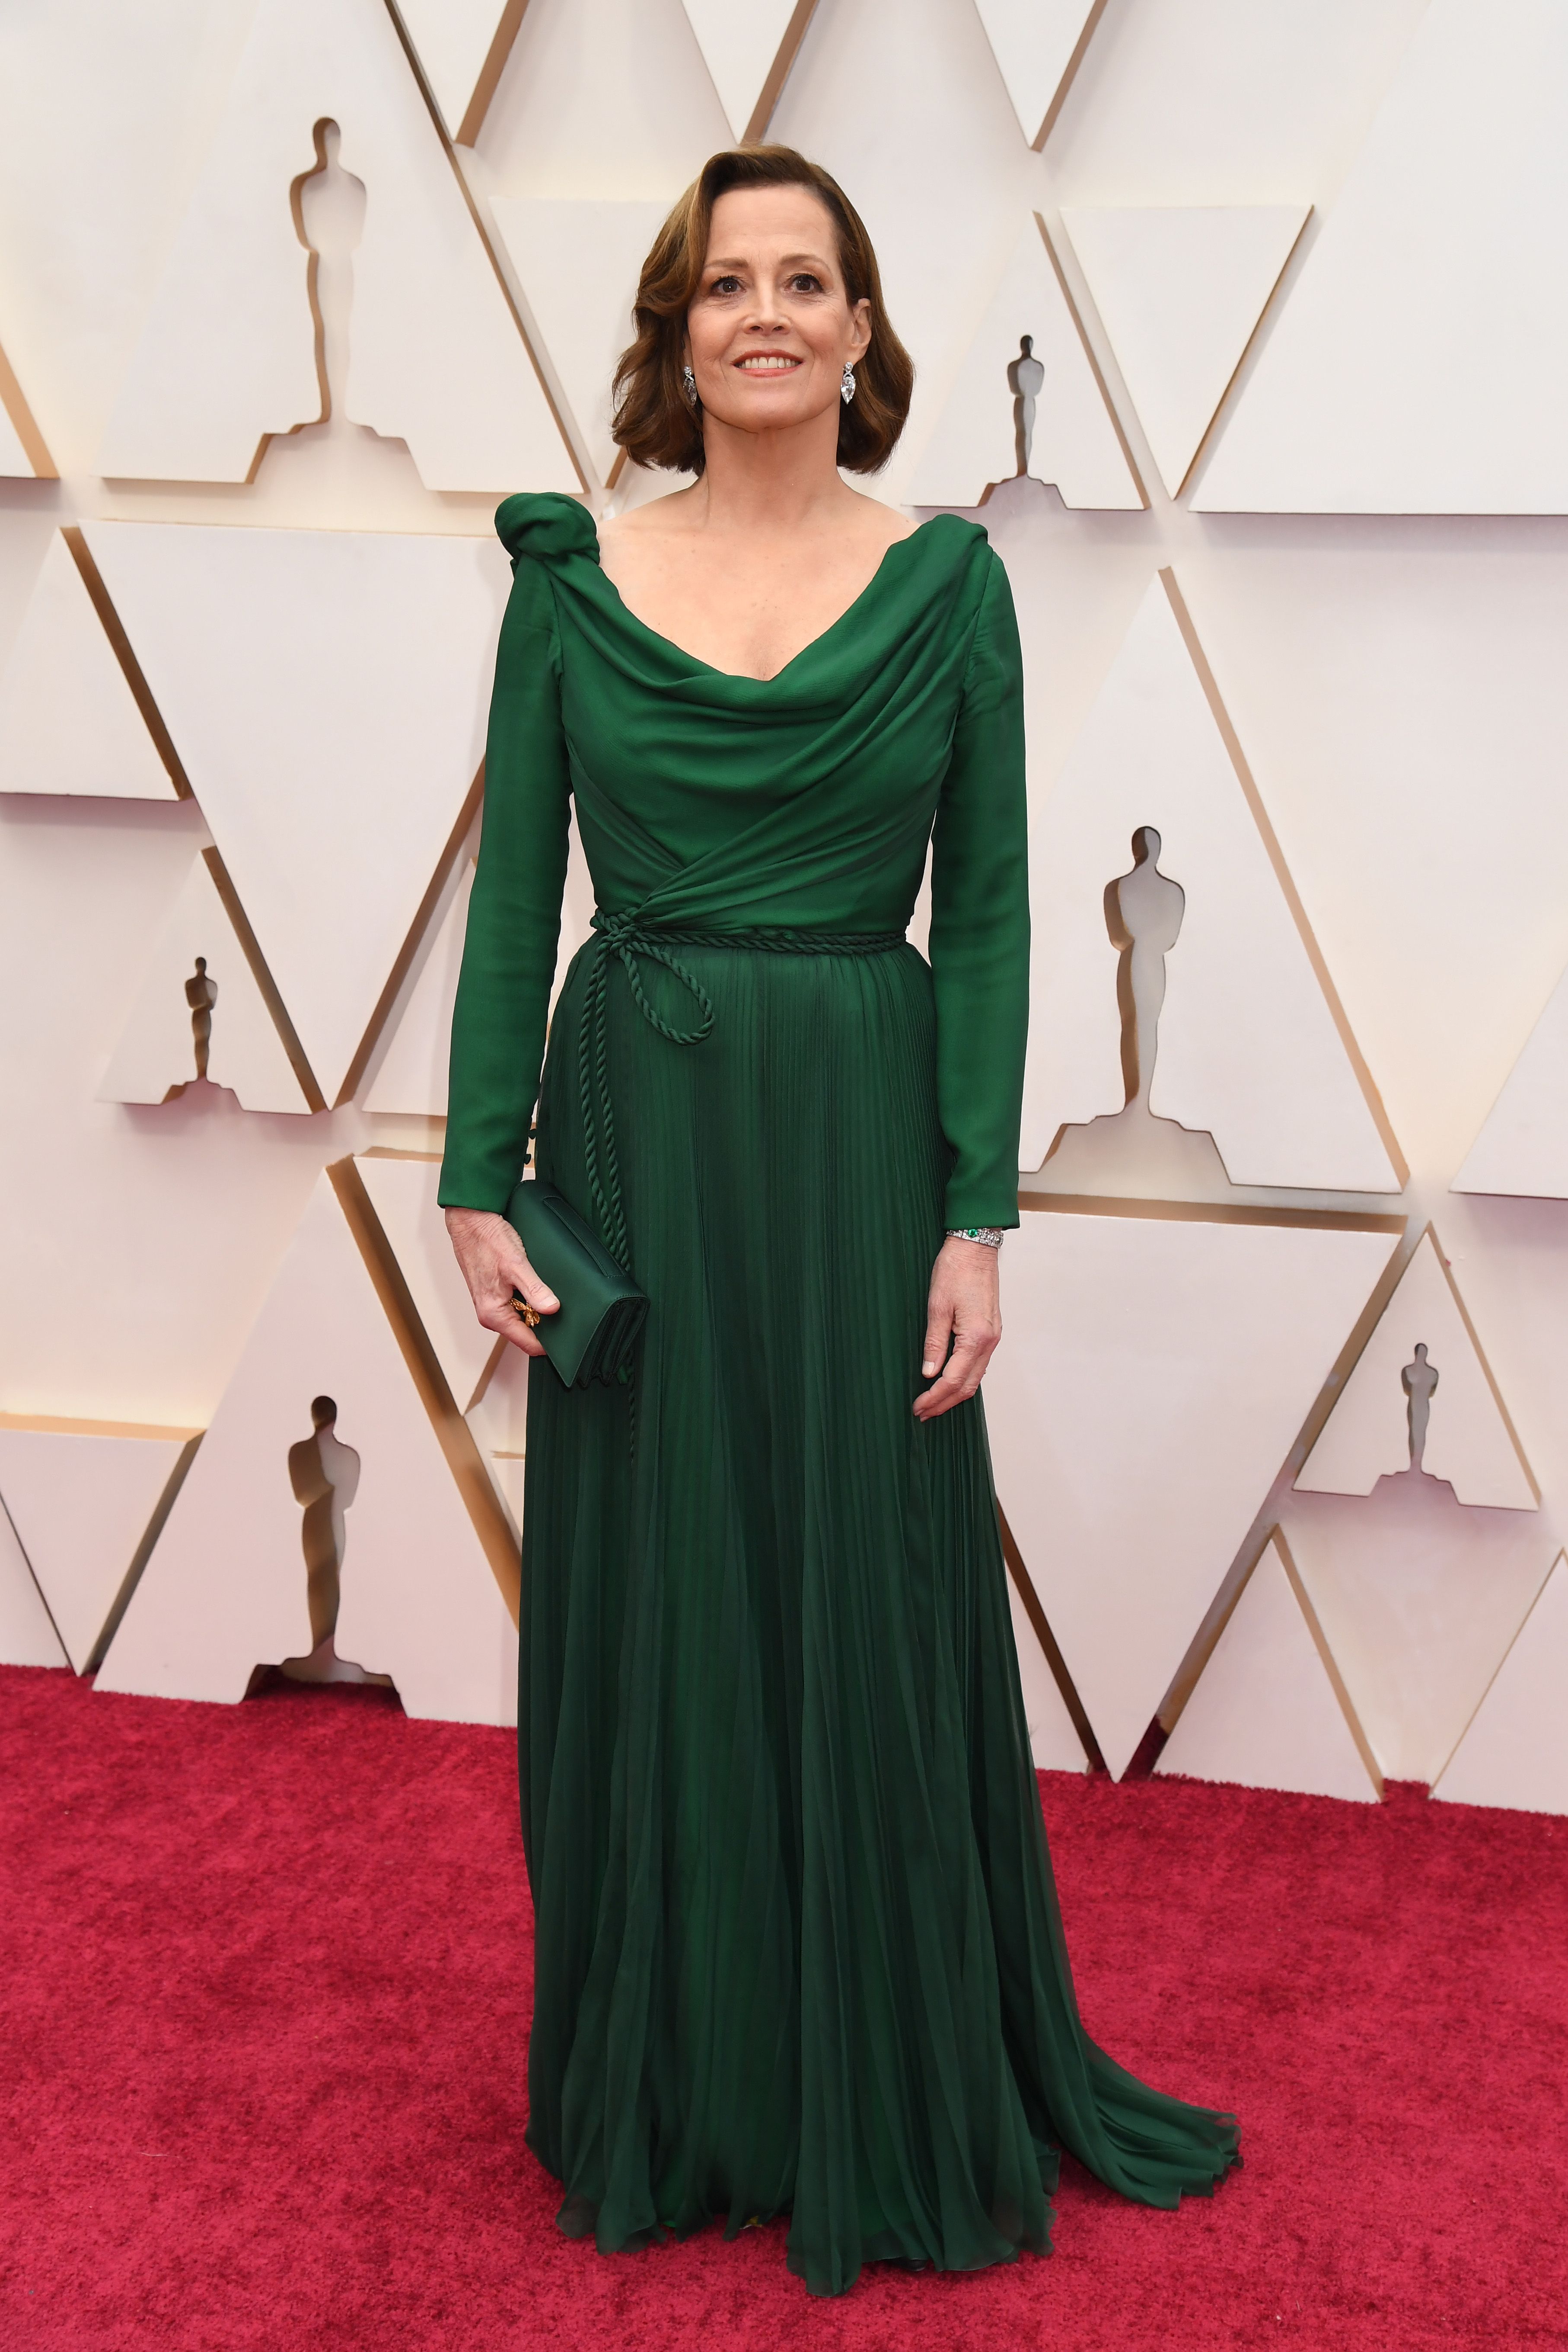 The 56 Best Oscars Red Carpet Dresses We'll Never Forget